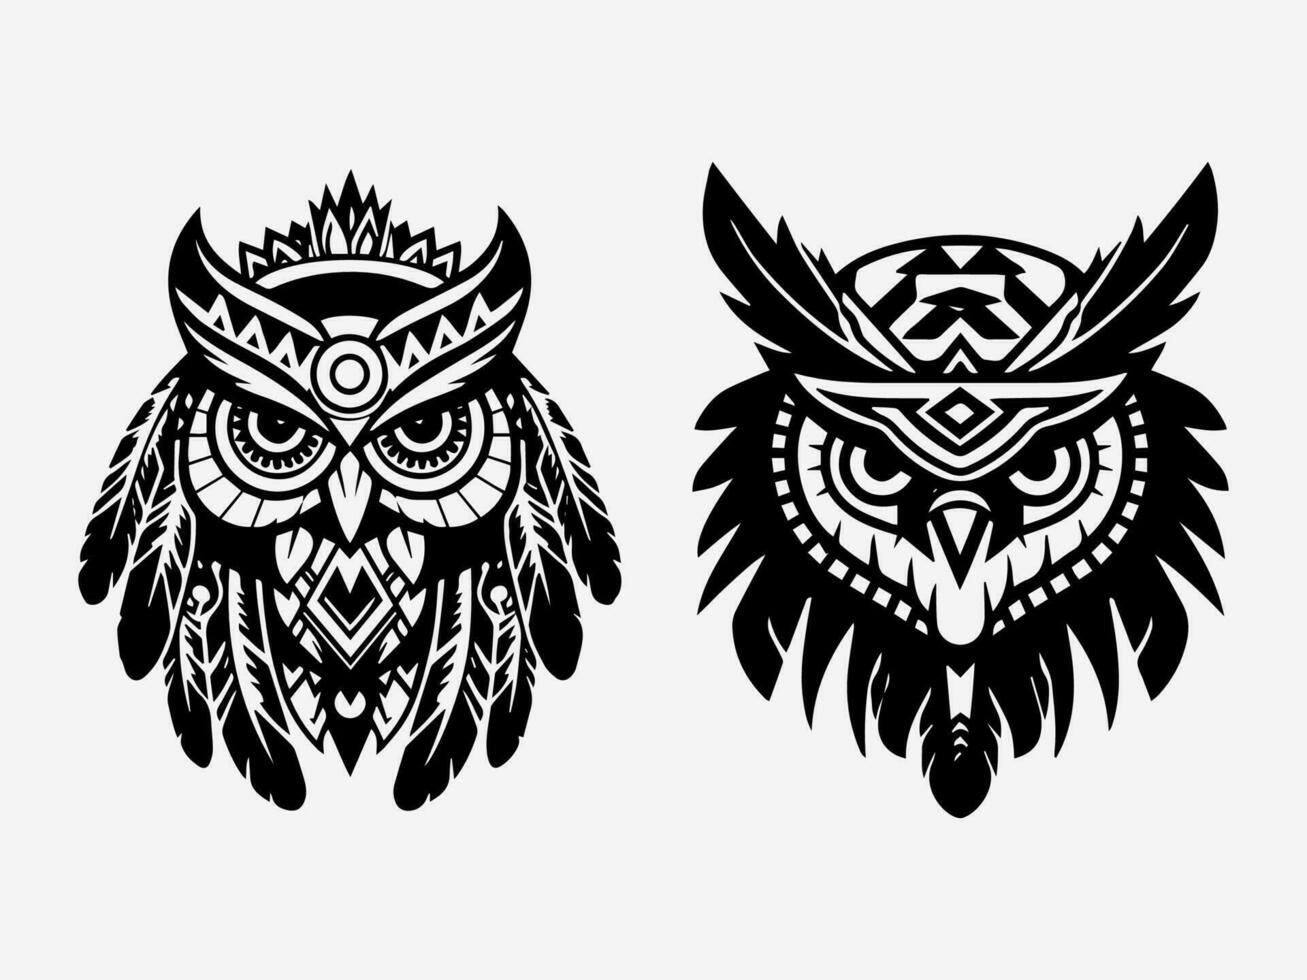 Artistic hand drawn illustration of an owl, capturing its majestic presence and enigmatic charm in a logo design vector